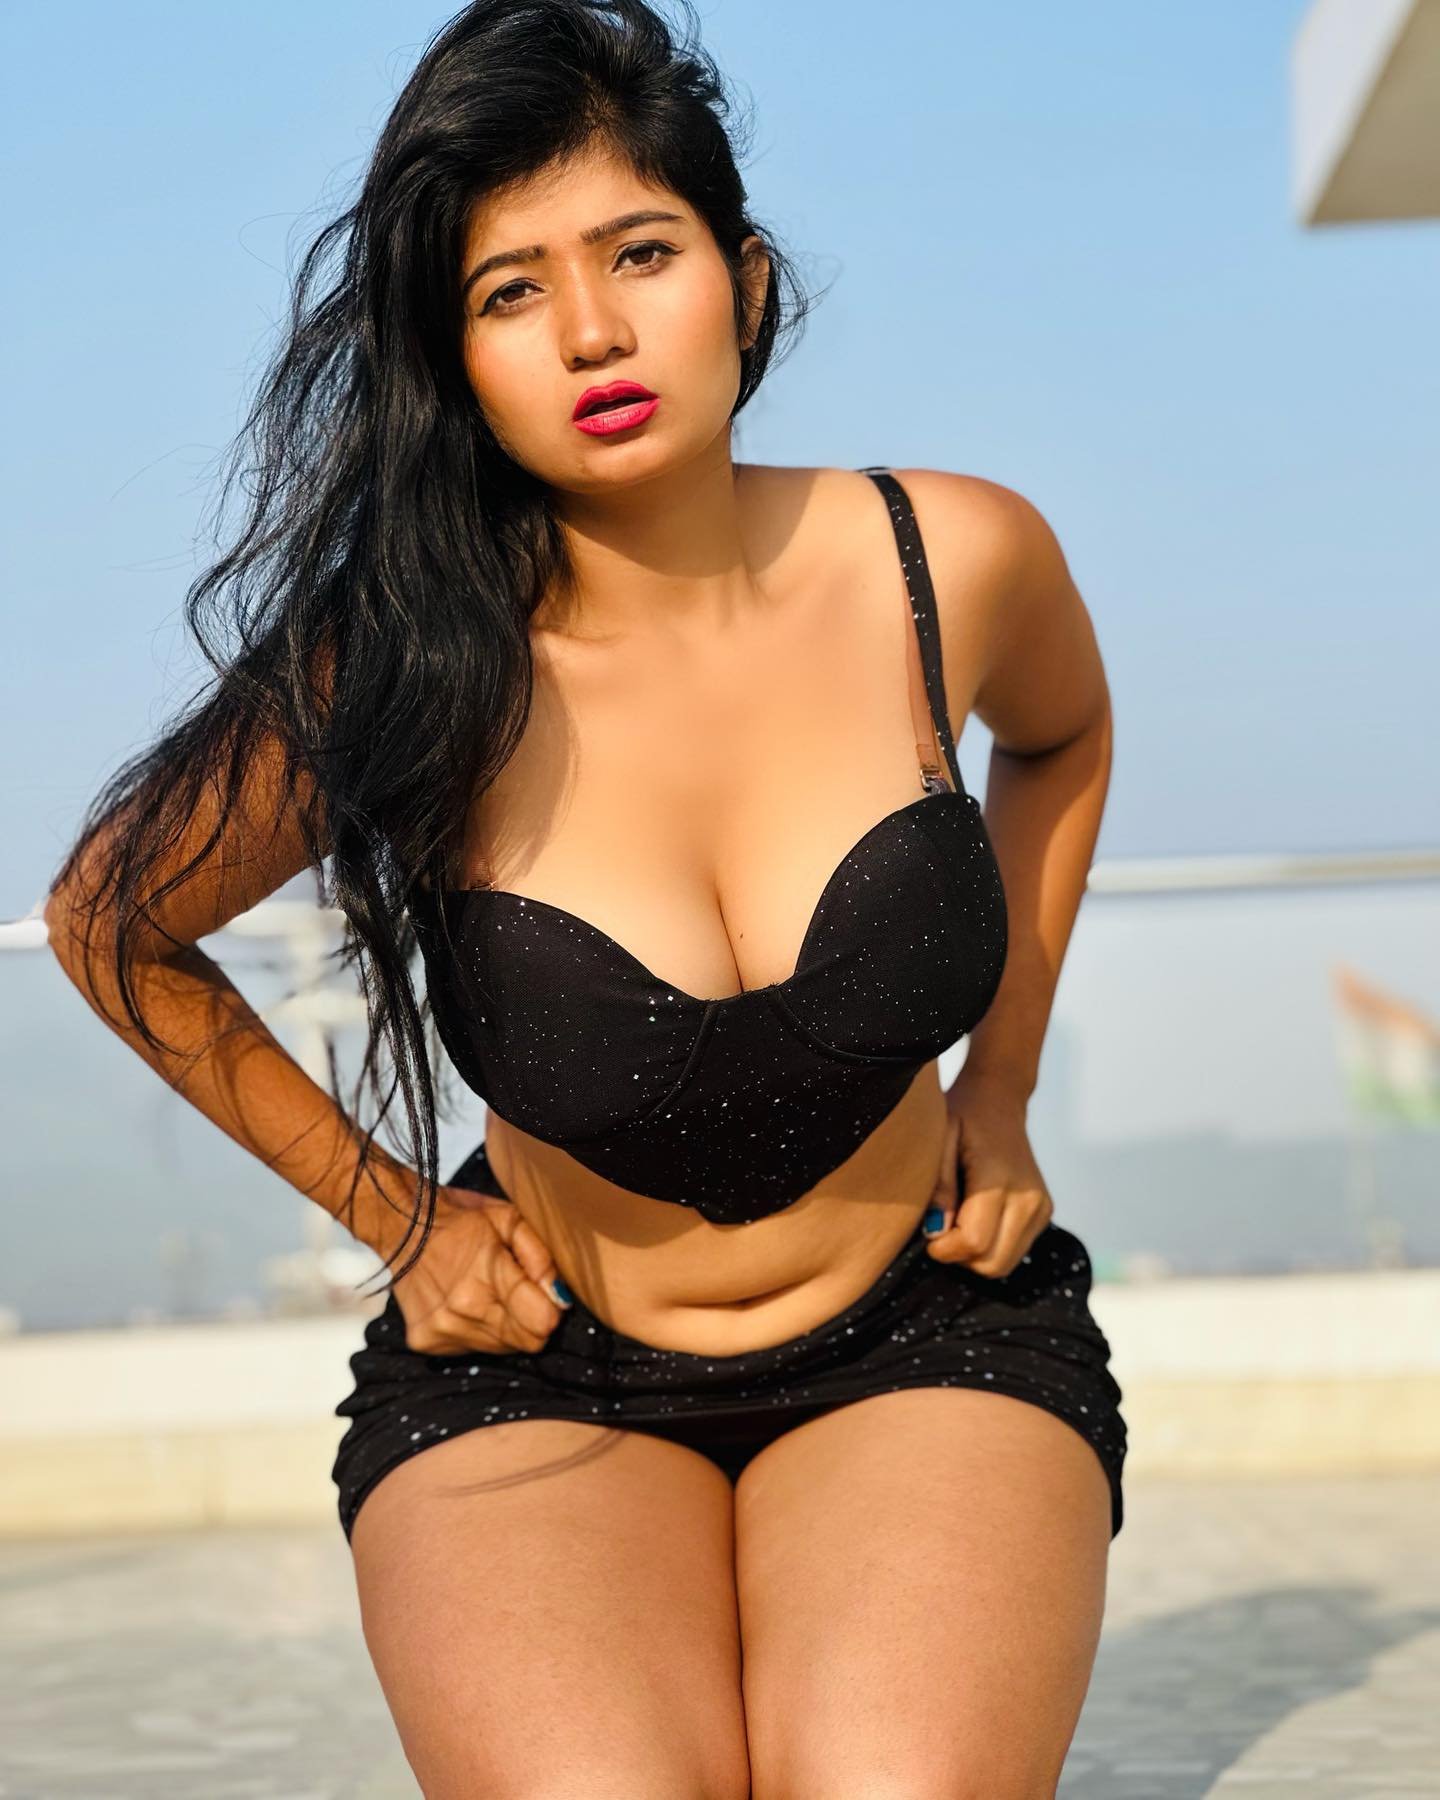 Neha Singhinstagram Starcheck Out Top 24 Hot Sexy Photos 7915